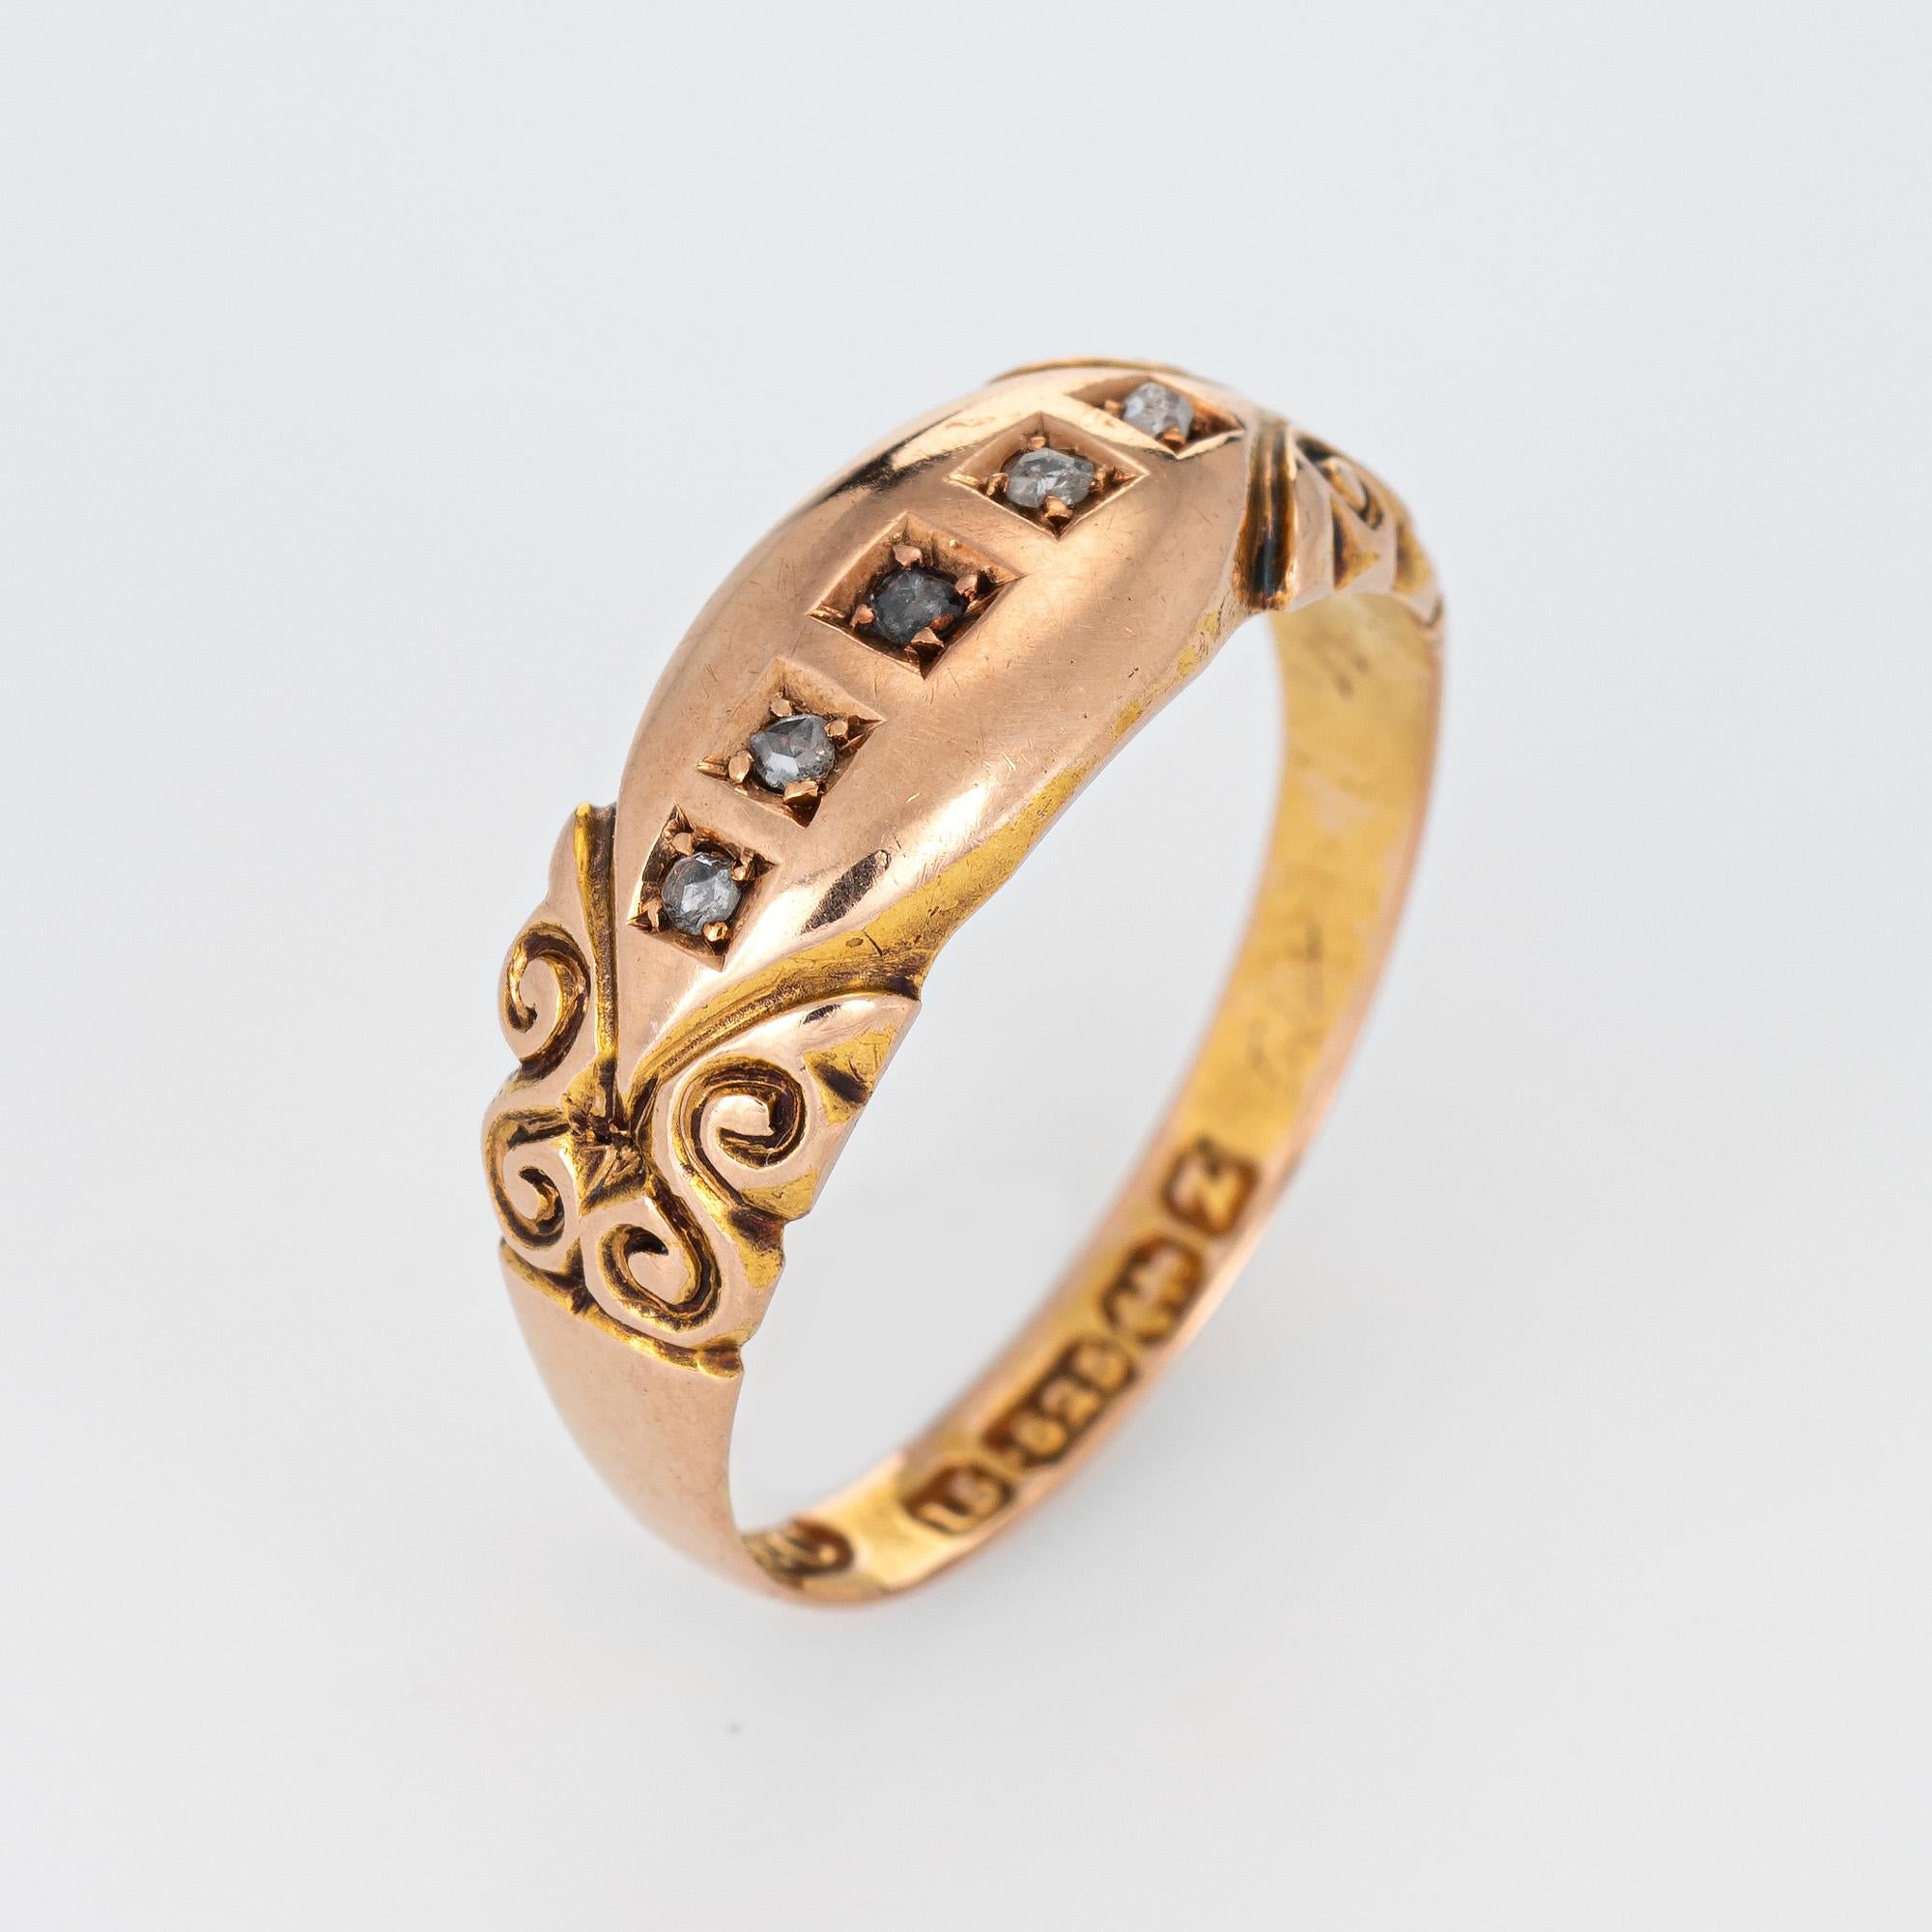 Antique Victorian gypsy band (circa 1899), crafted in 15 karat rose gold. 

Five old rose cut diamonds total an estimated 0.05 carats (estimated at L-M color and I1 clarity).   

The old rose cut diamonds are set into a five stone setting with